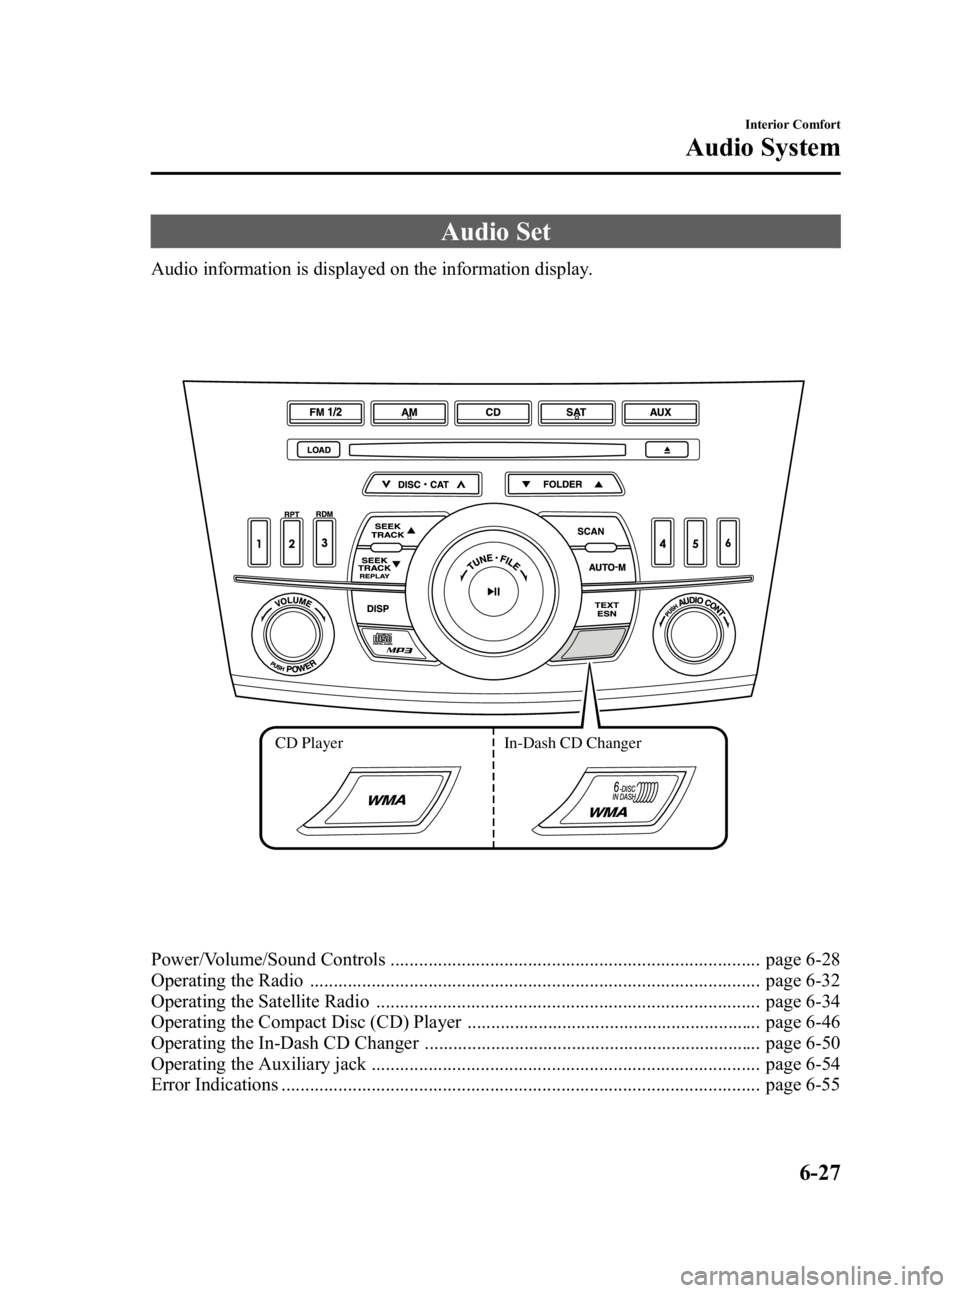 MAZDA MODEL 3 5-DOOR 2010  Owners Manual Black plate (257,1)
Audio Set
Audio information is displayed on the information display.
CD PlayerIn-Dash CD Changer
Power/Volume/Sound Controls .......................................................